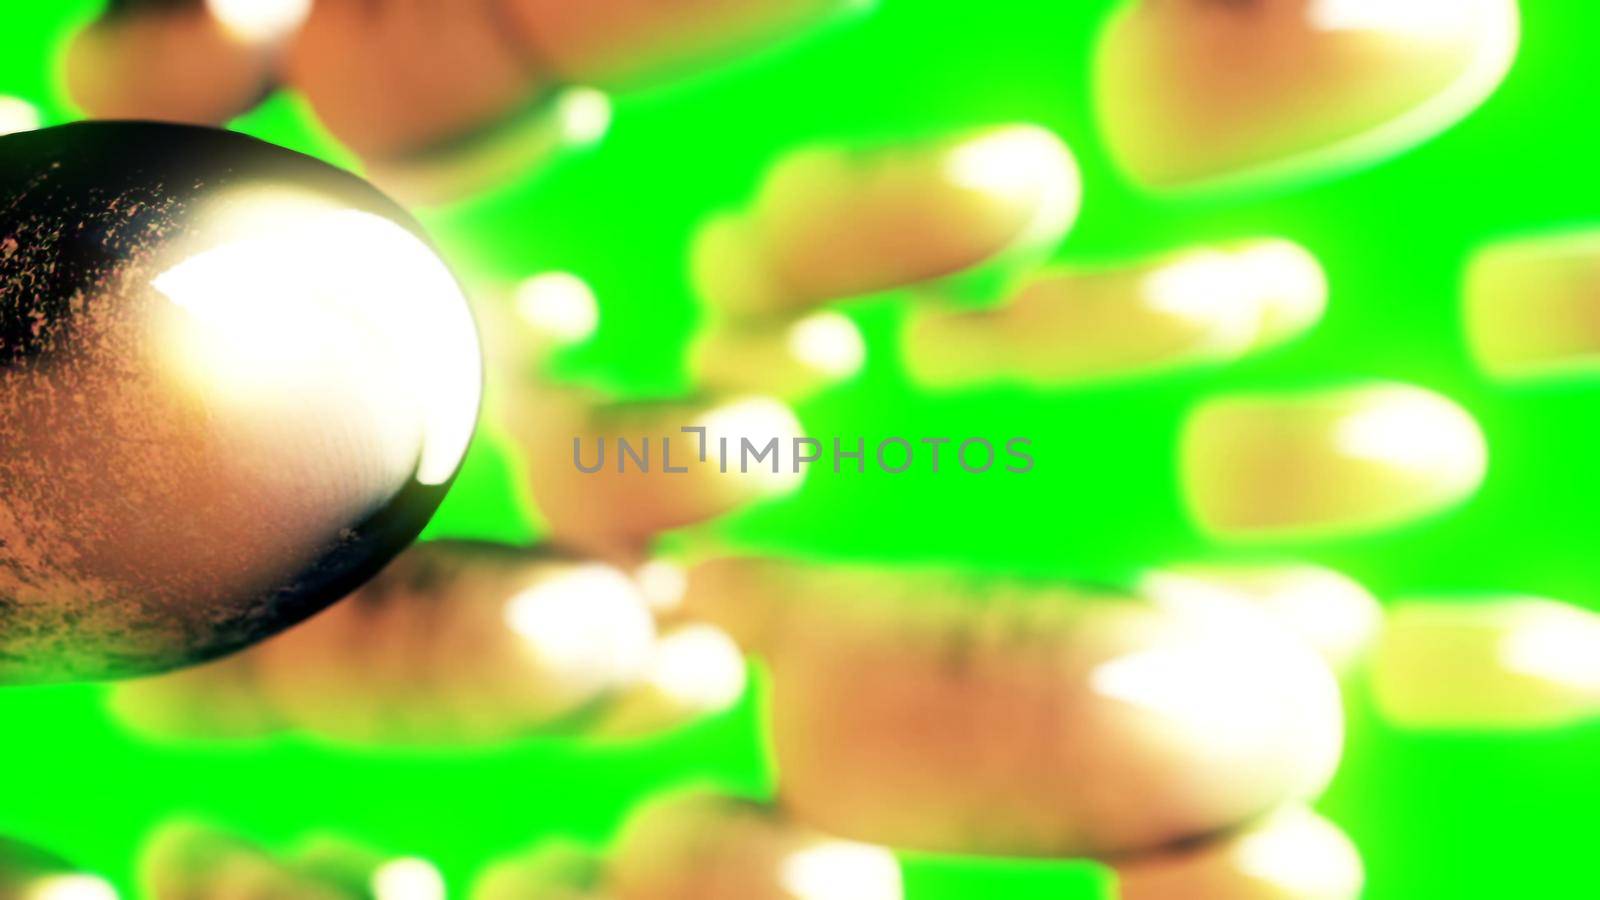 bullets on green screen. 3D rendering by designprojects